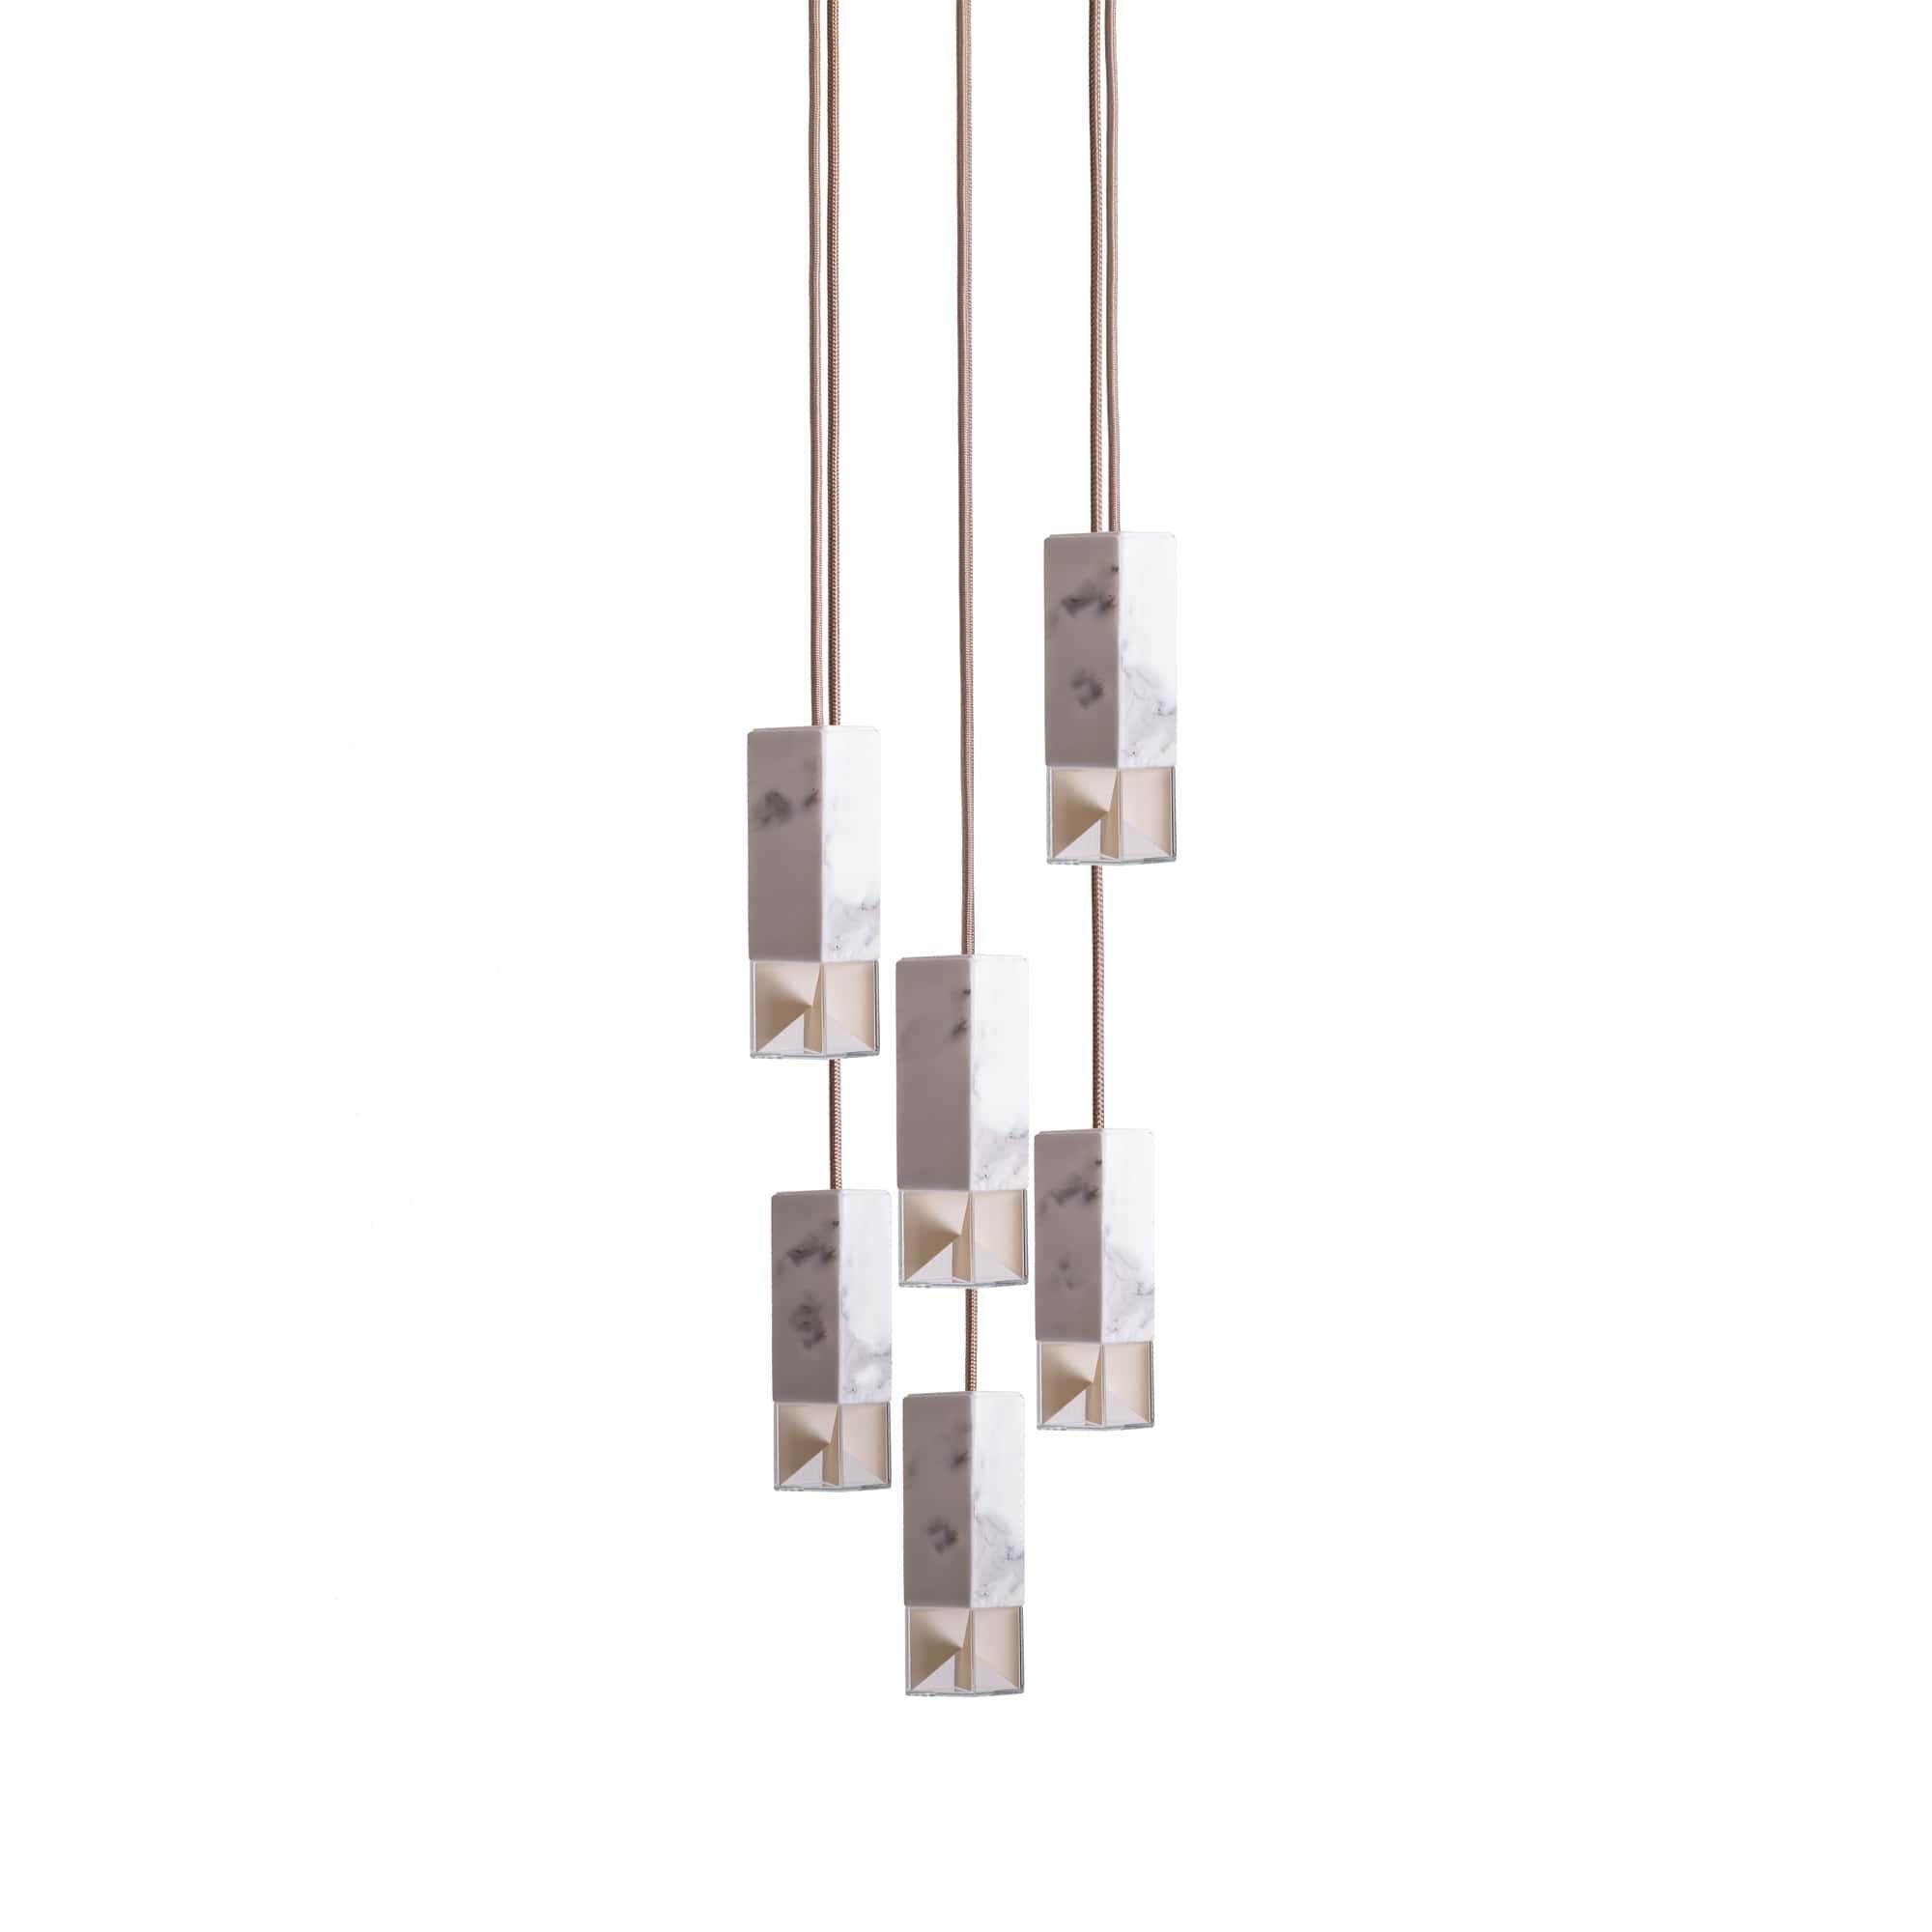 Lamp one 6-light chandelier in marble by Formaminima
Dimensions: H 93 x 30 x 30 cm
Materials: Lamp body in marble

Ultra-thin anti-reflection crystal diffuser
Inside-diffuser Limoges biscuit-finish porcelain sheets
Satin brass ceiling rose H